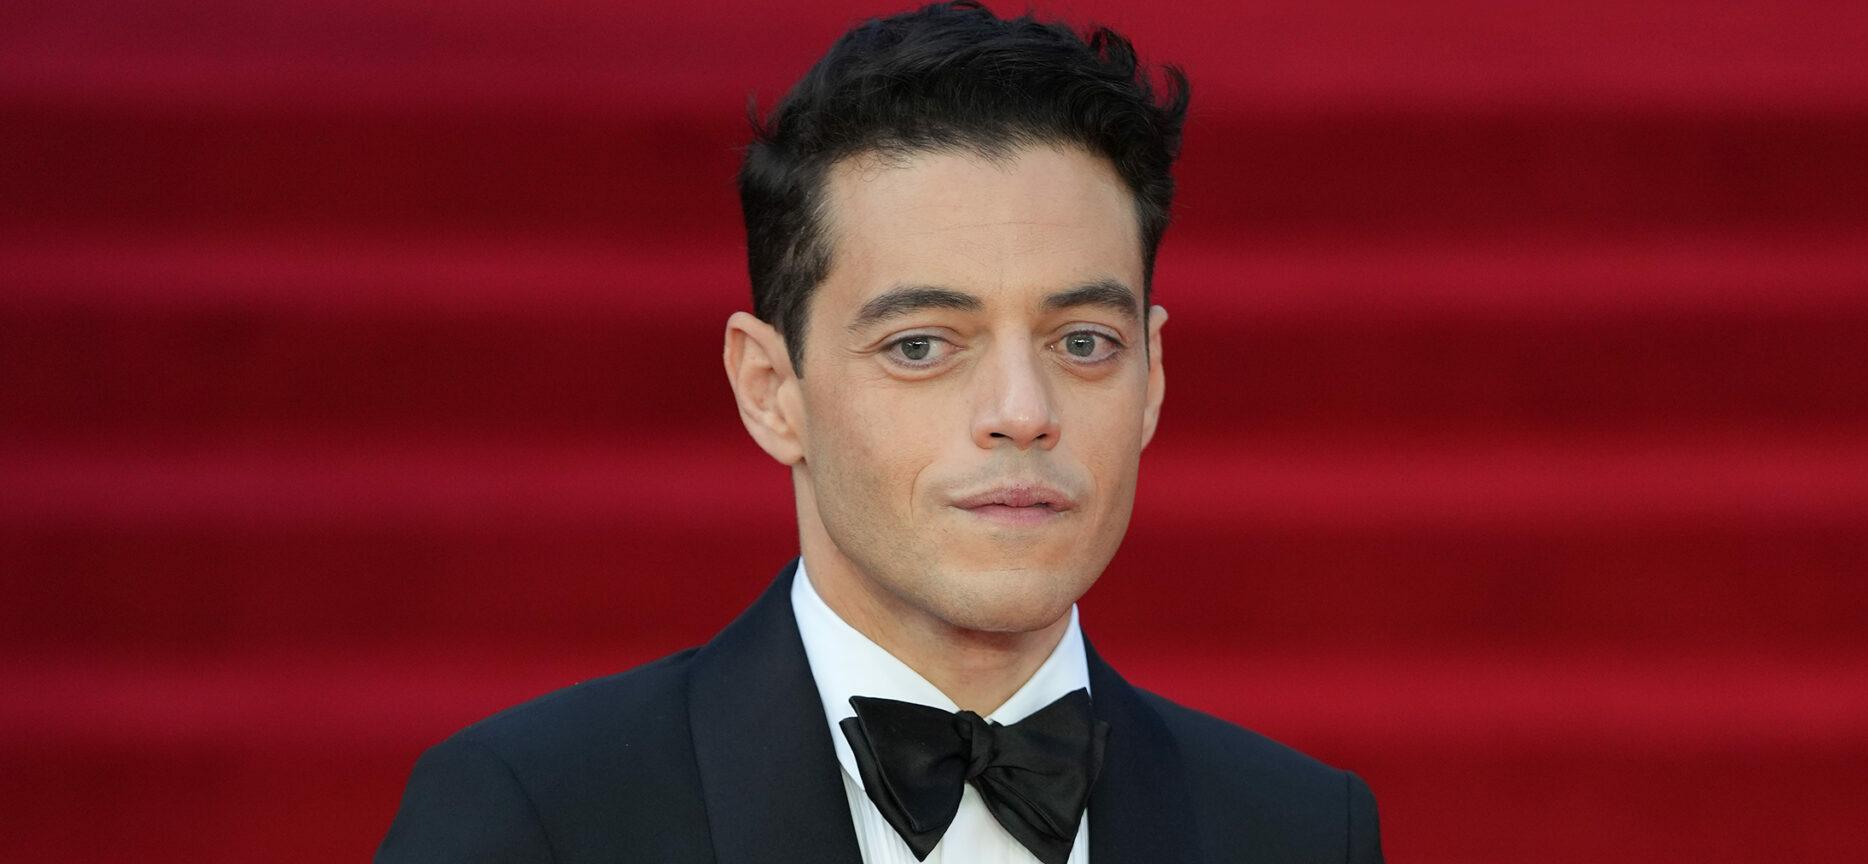 Rami Malek Shares Details About Candid Talk With Kate Middleton & His First Meeting With Daniel Craig